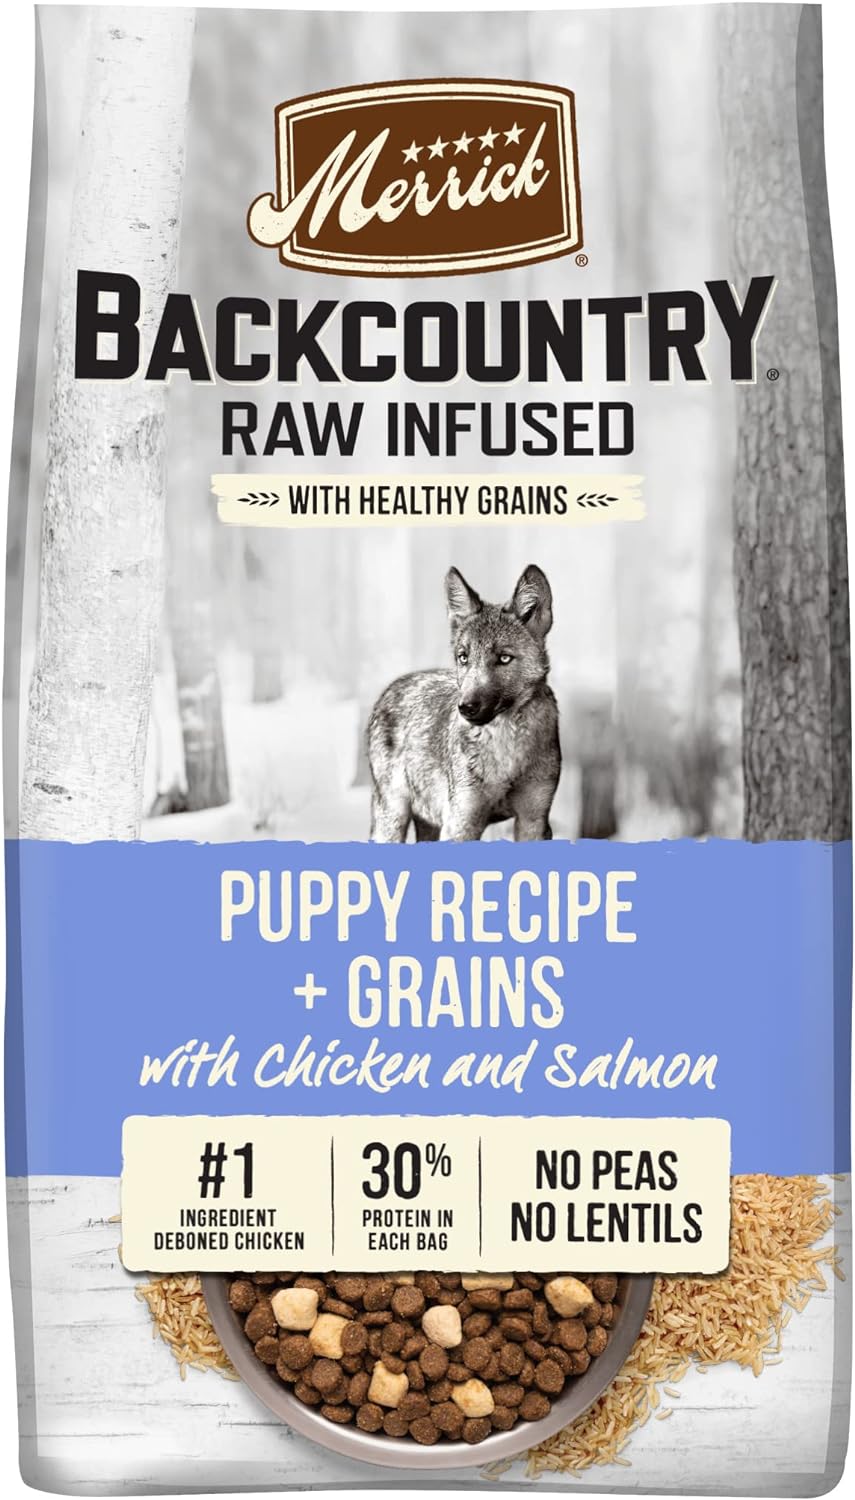 Merrick Backcountry Raw Infused Puppy Recipe + Grains Dry Dog Food – Gallery Image 1